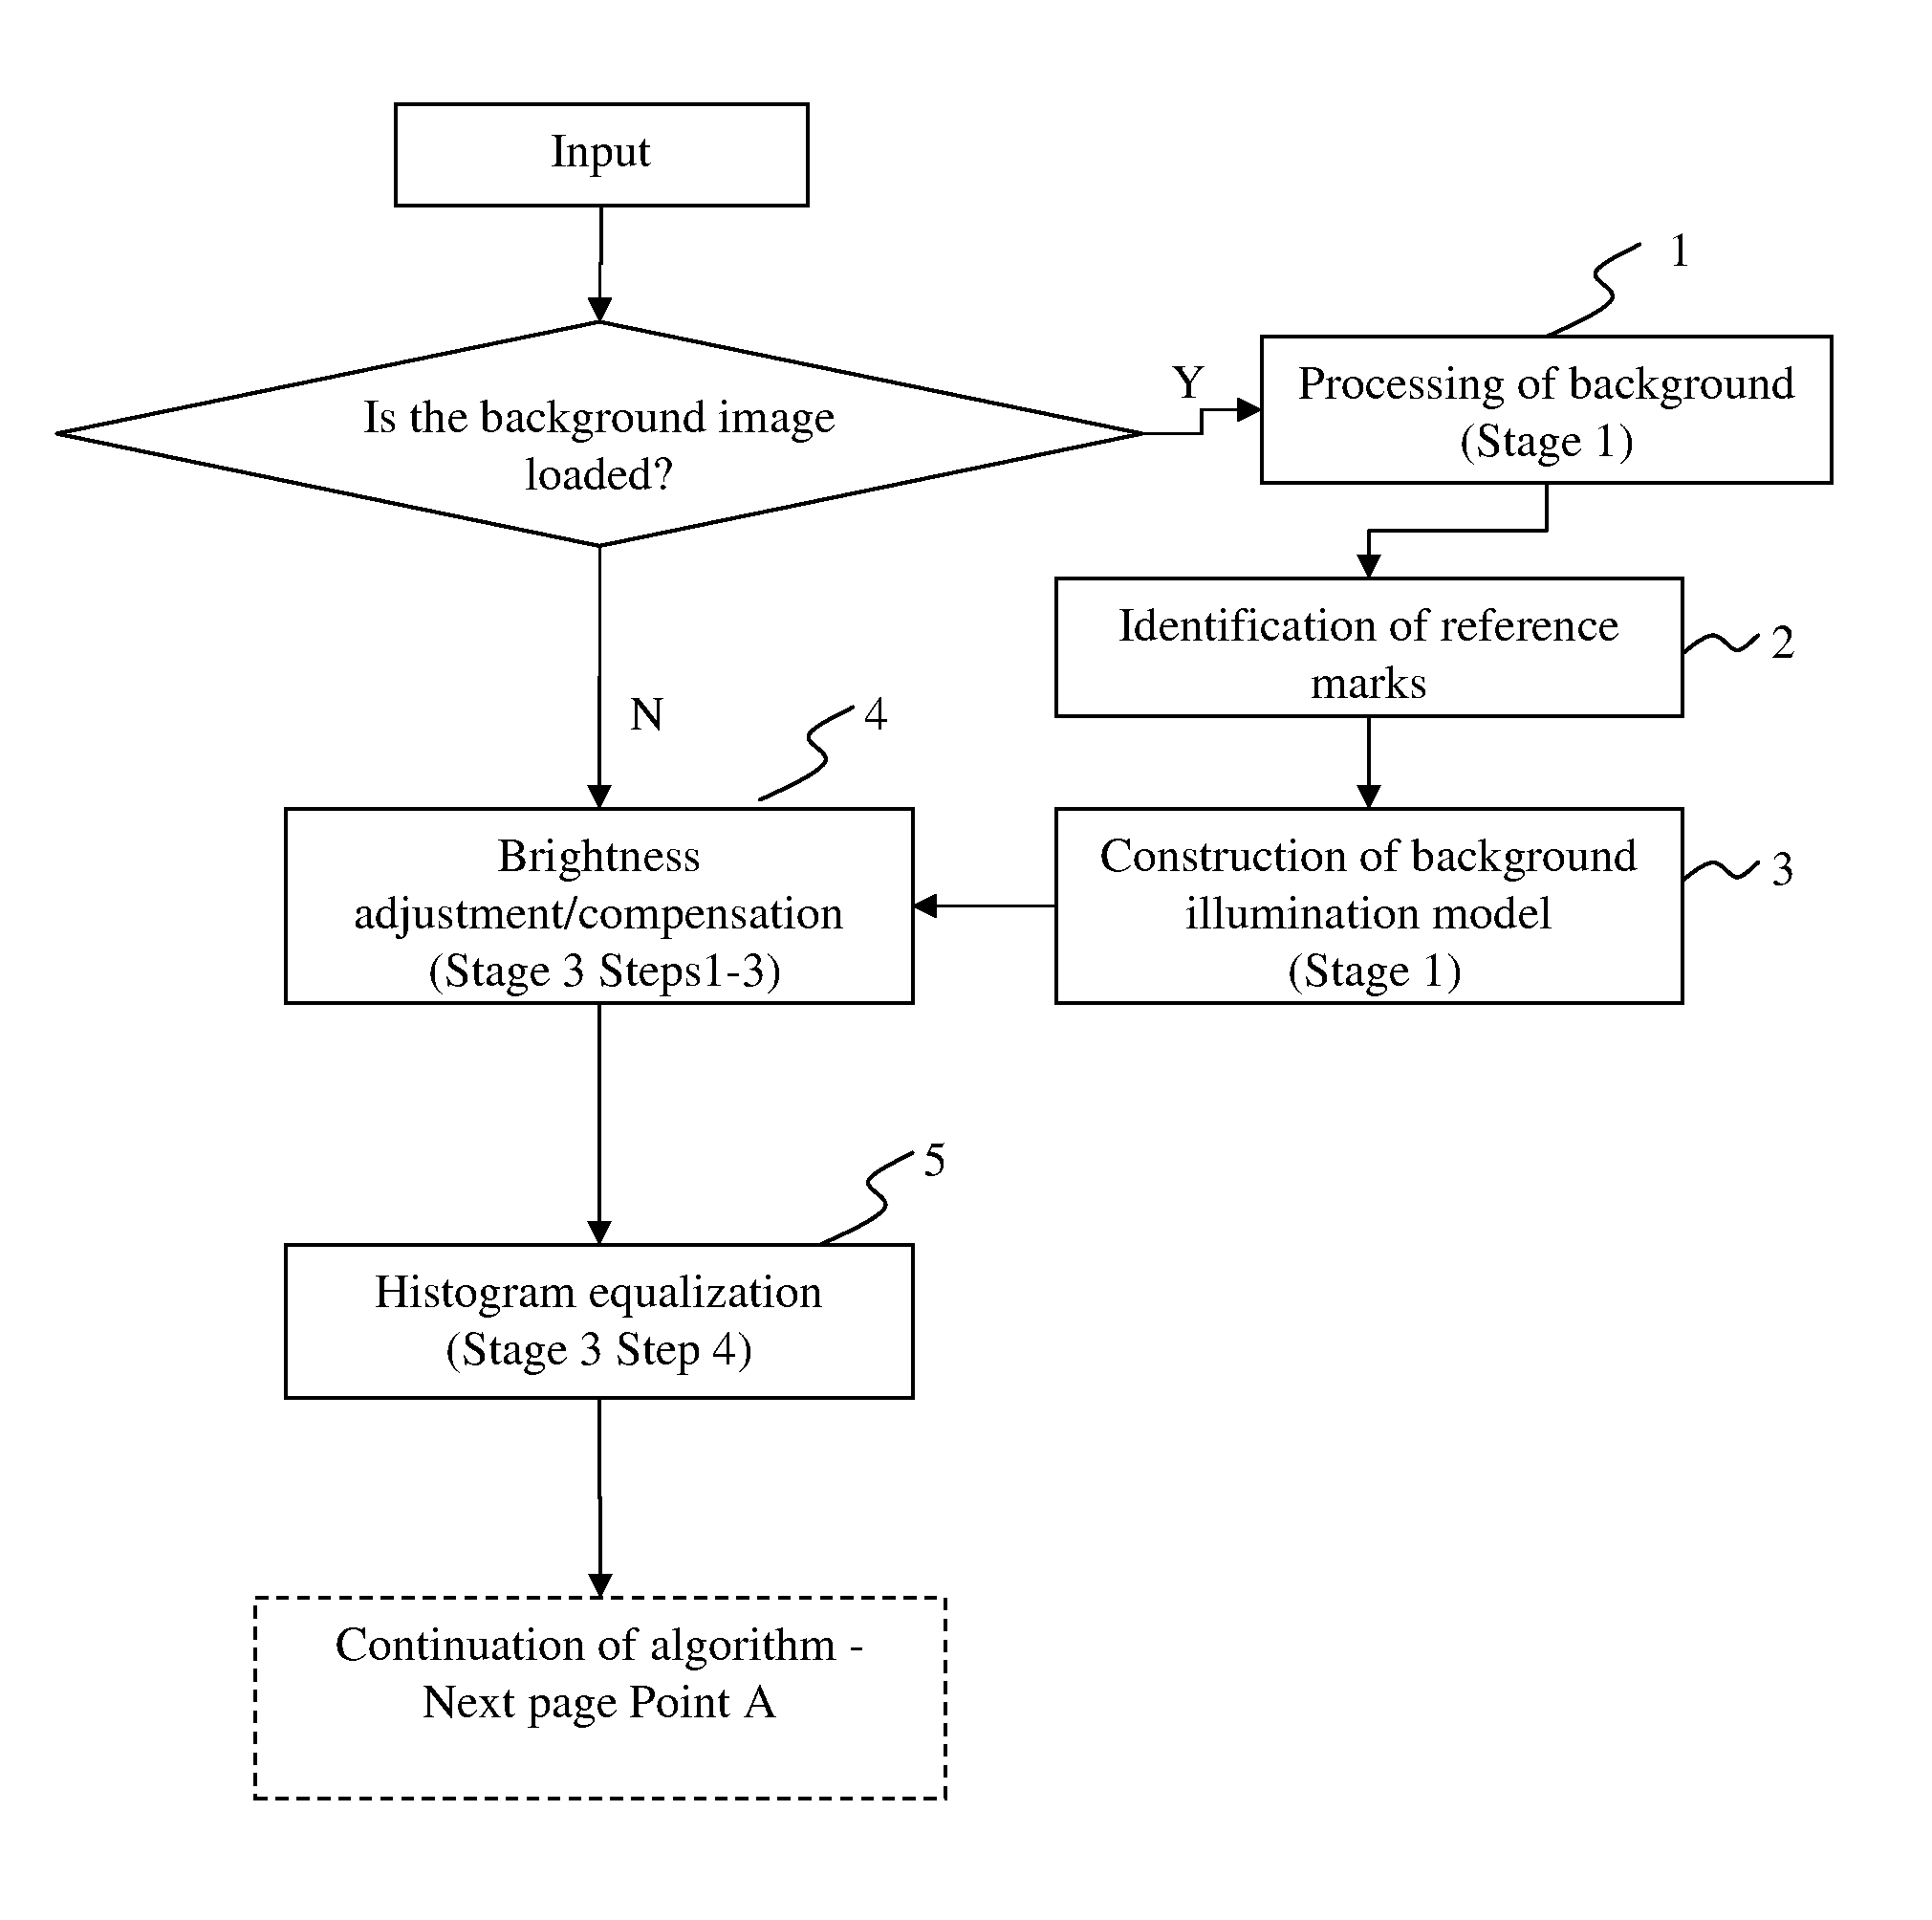 System and method for computer-aided image processing for generation of a 360 degree view model